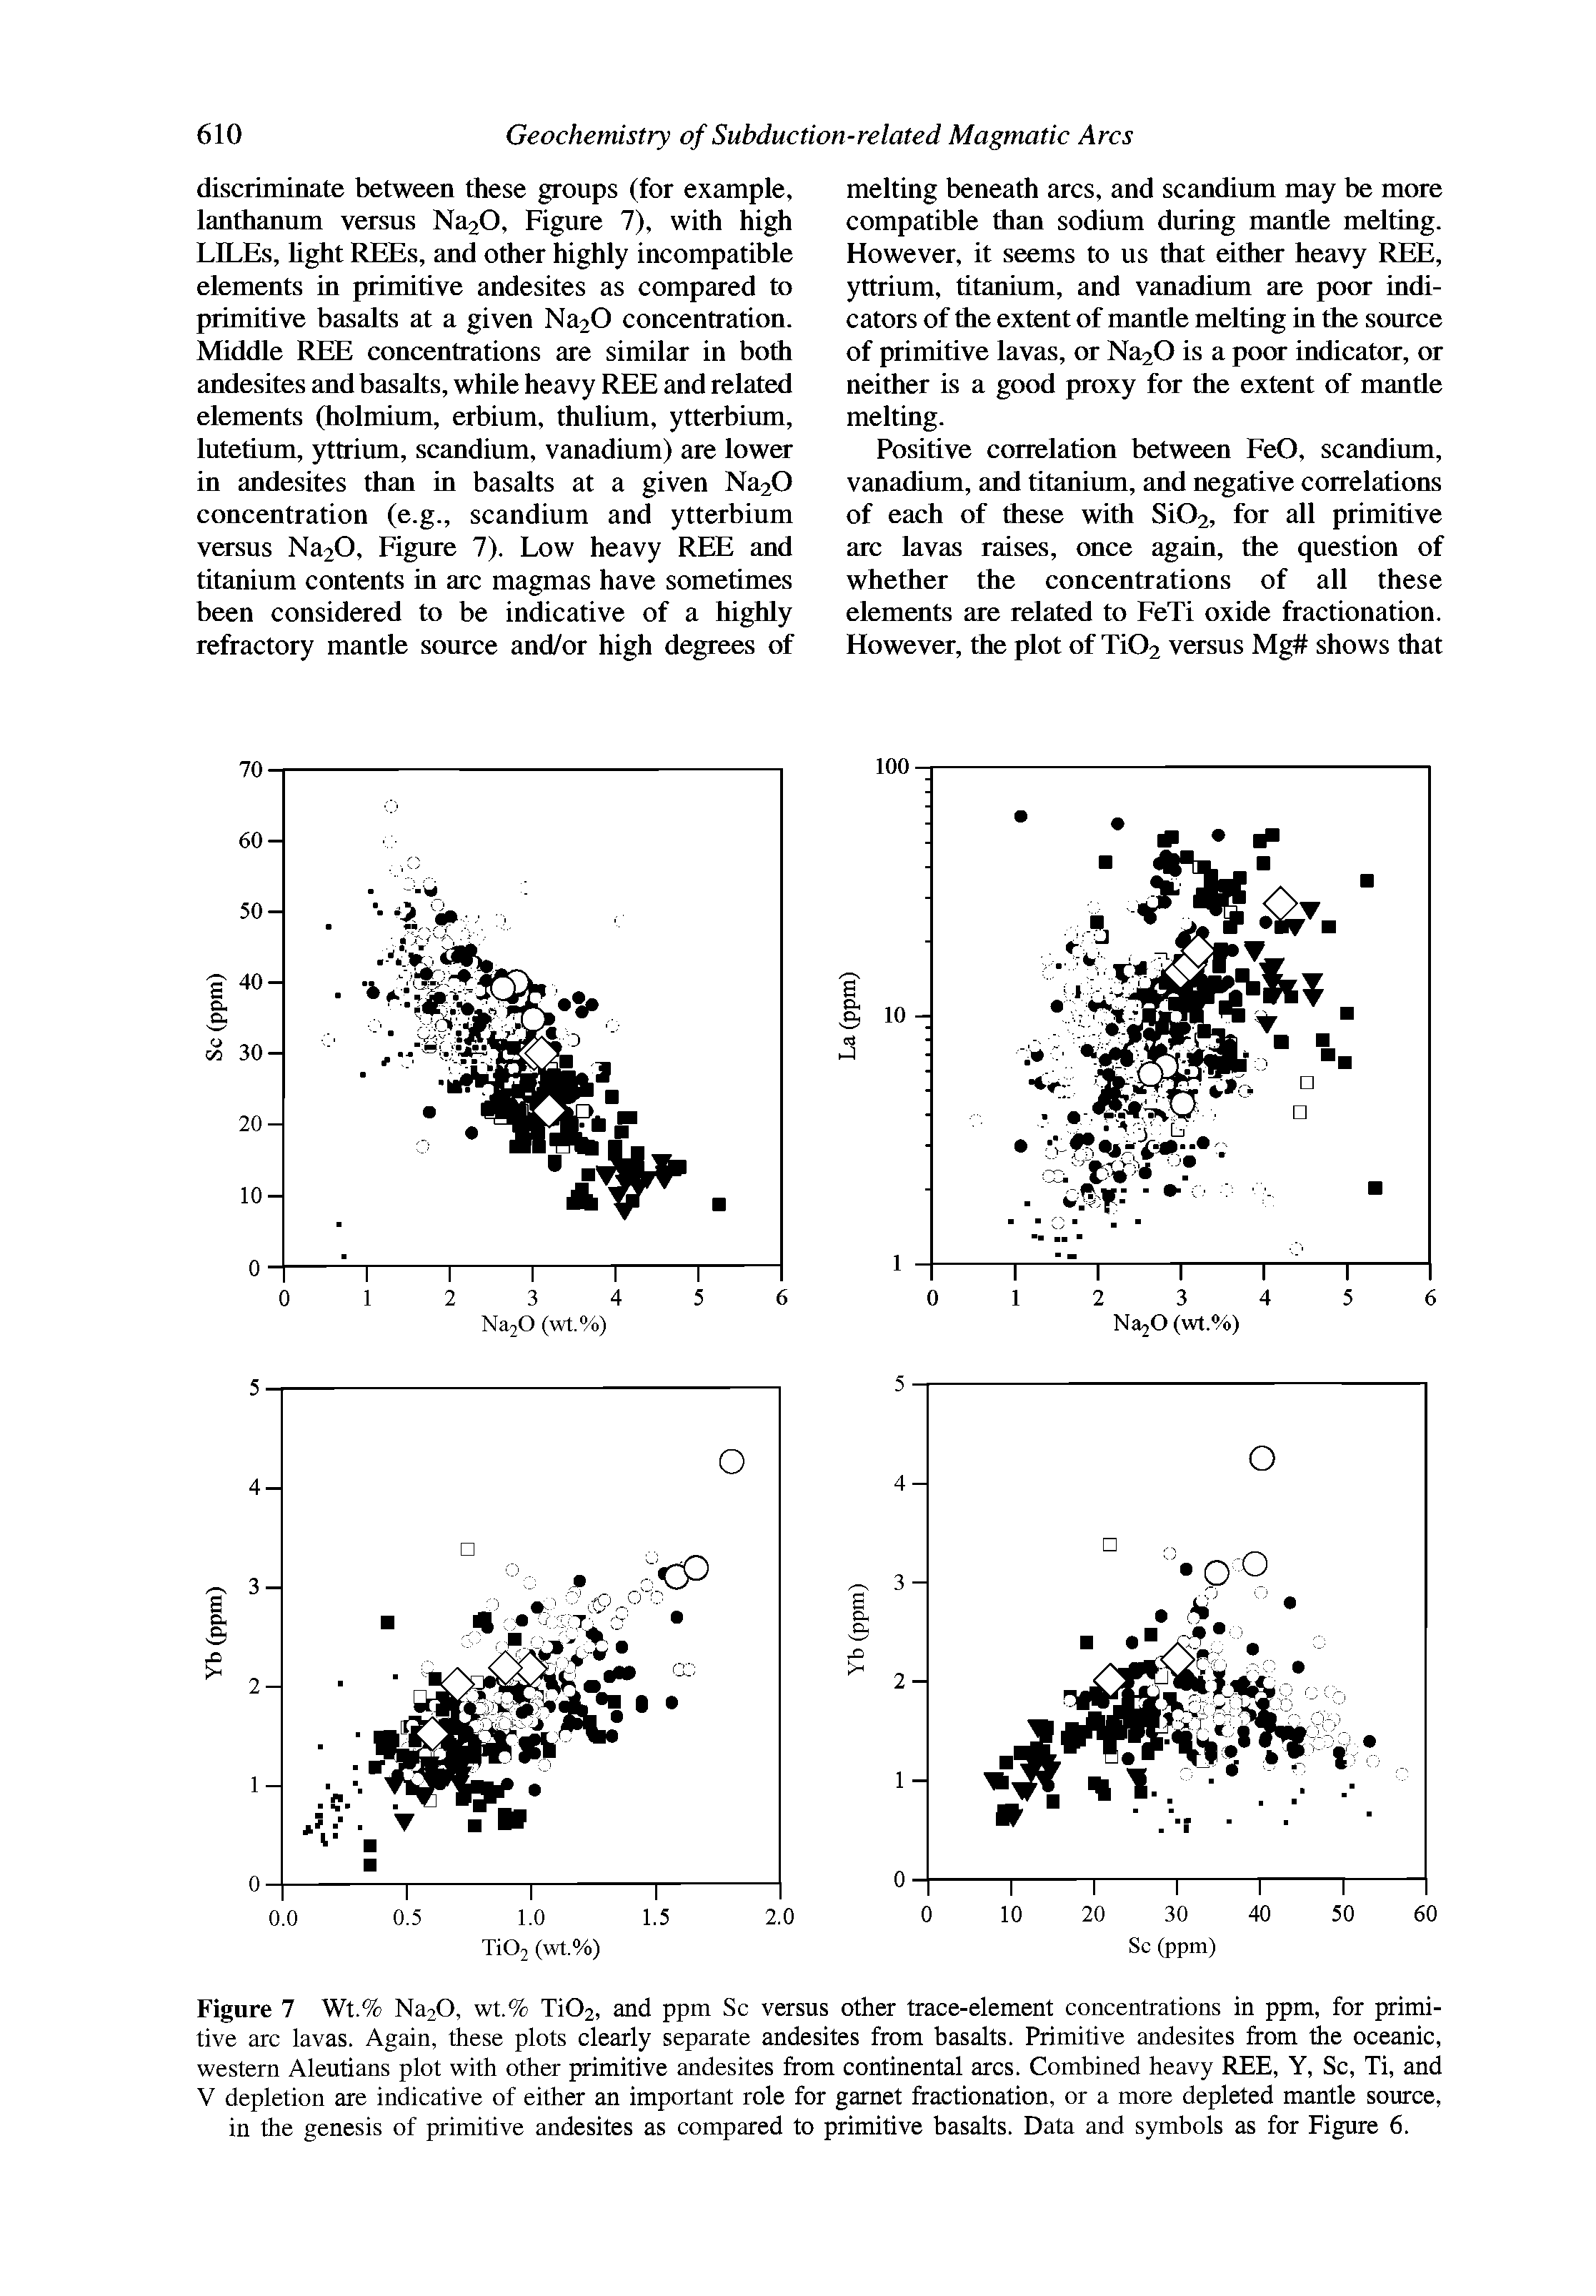 Figure 7 Wt.% Na20, wt.% Ti02, and ppm Sc versus other trace-element concentrations in ppm, for primitive arc lavas. Again, these plots clearly separate andesites from basalts. Primitive andesites from the oceanic, western Aleutians plot with other primitive andesites from continental arcs. Combined heavy REE, Y, Sc, Ti, and V depletion are indicative of either an important role for garnet fractionation, or a more depleted mantle source, in the genesis of primitive andesites as compared to primitive basalts. Data and symbols as for Figure 6.